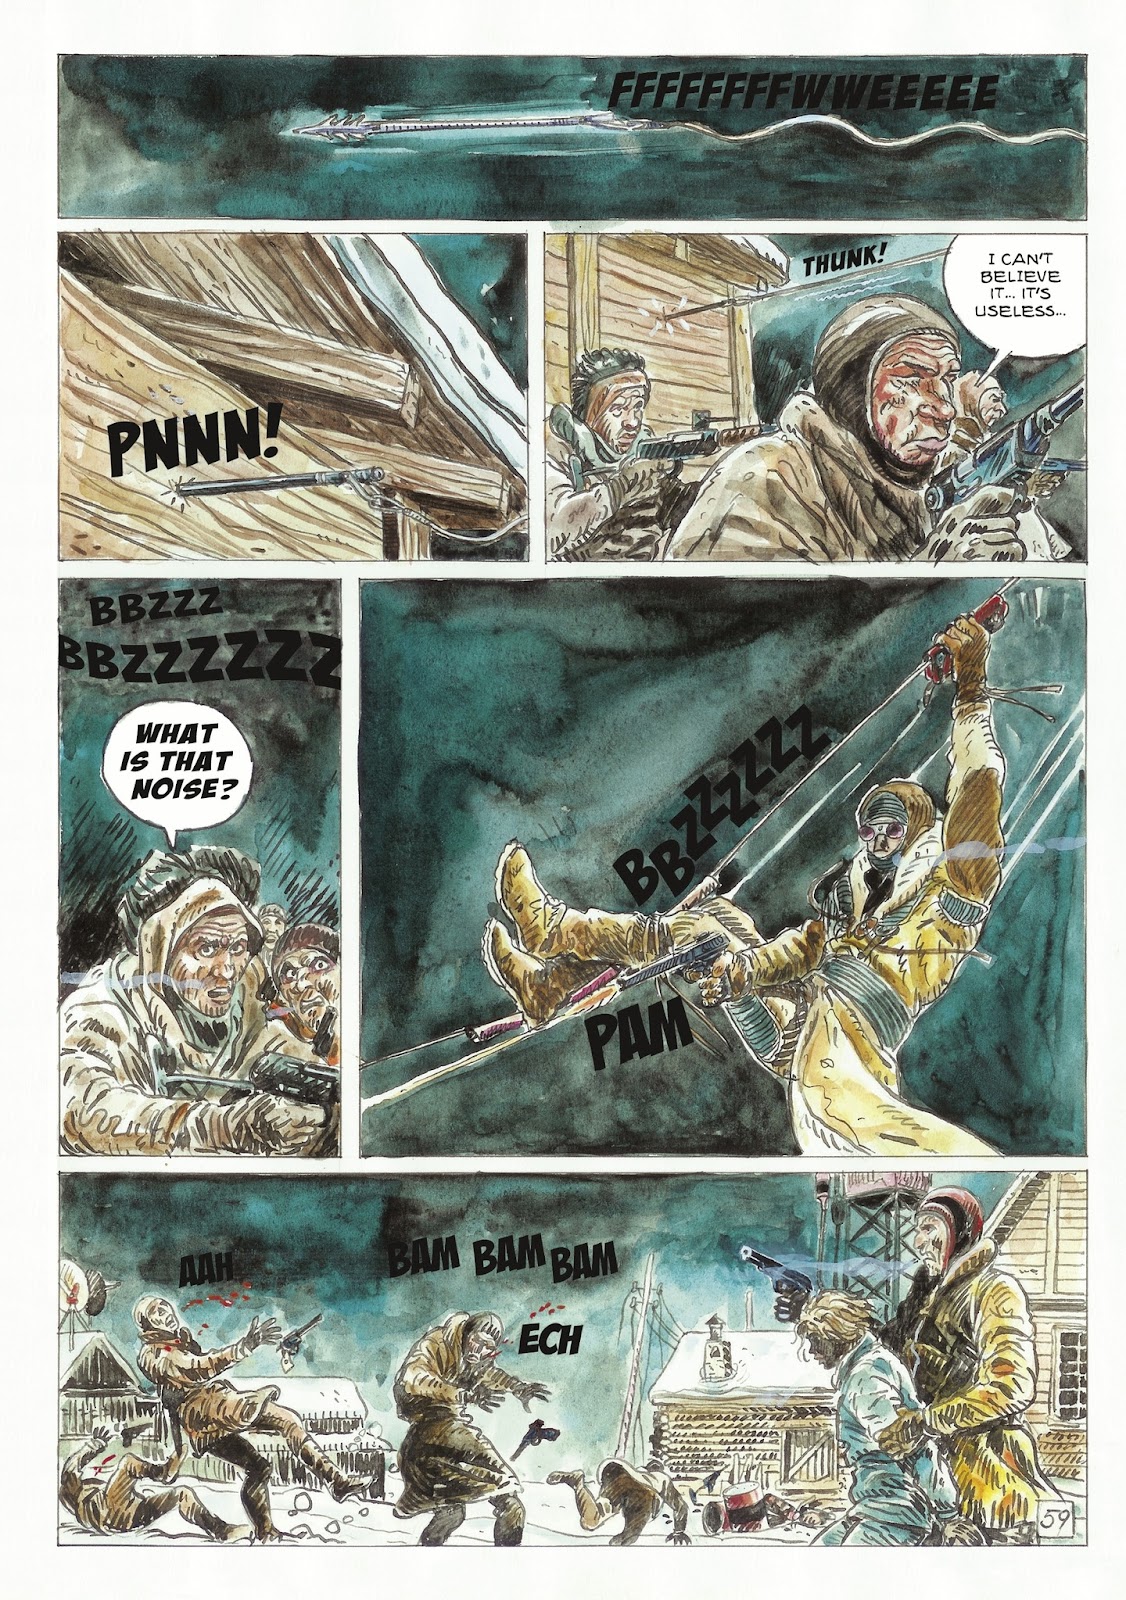 The Man With the Bear issue 2 - Page 5